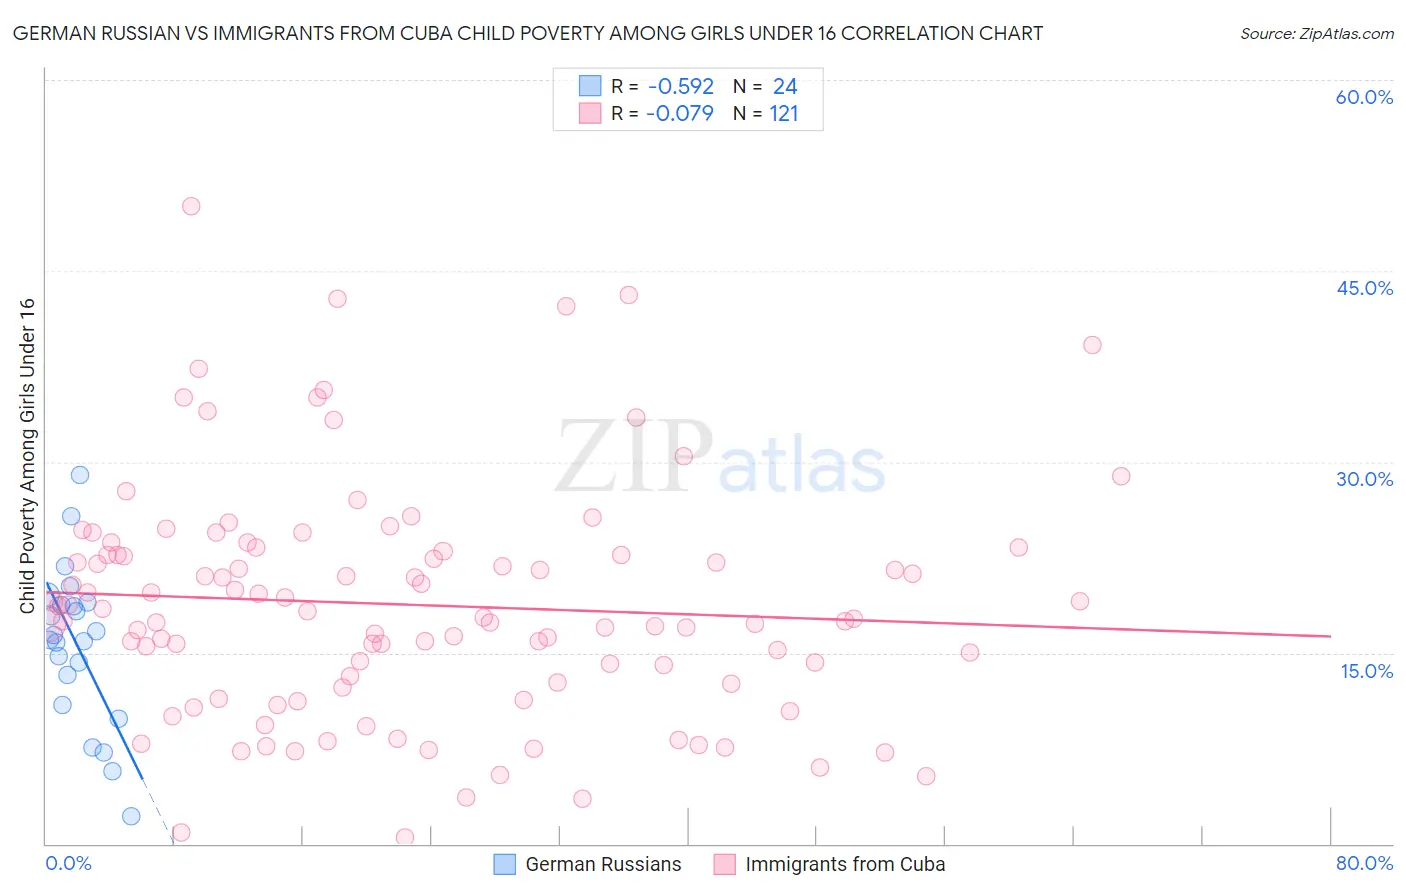 German Russian vs Immigrants from Cuba Child Poverty Among Girls Under 16